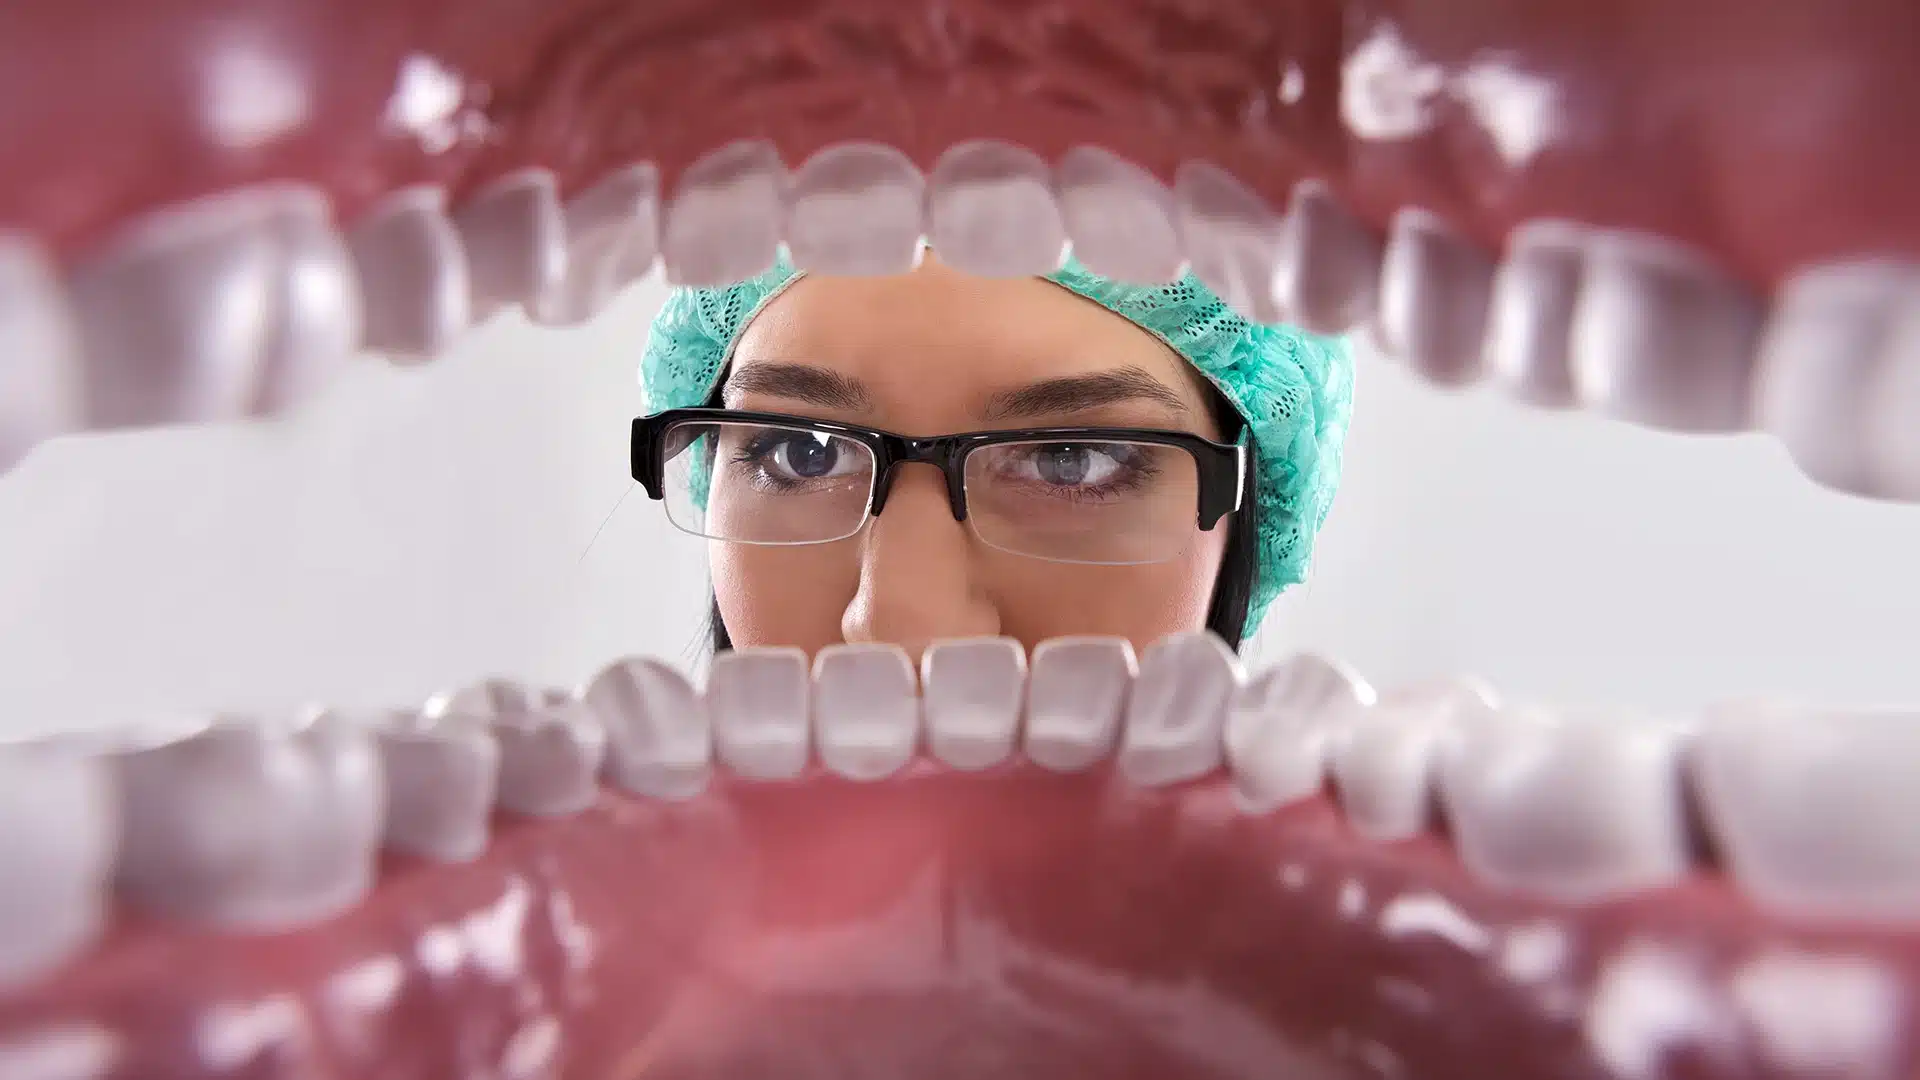 view from inside mouth to dentist looking at teeth and gums